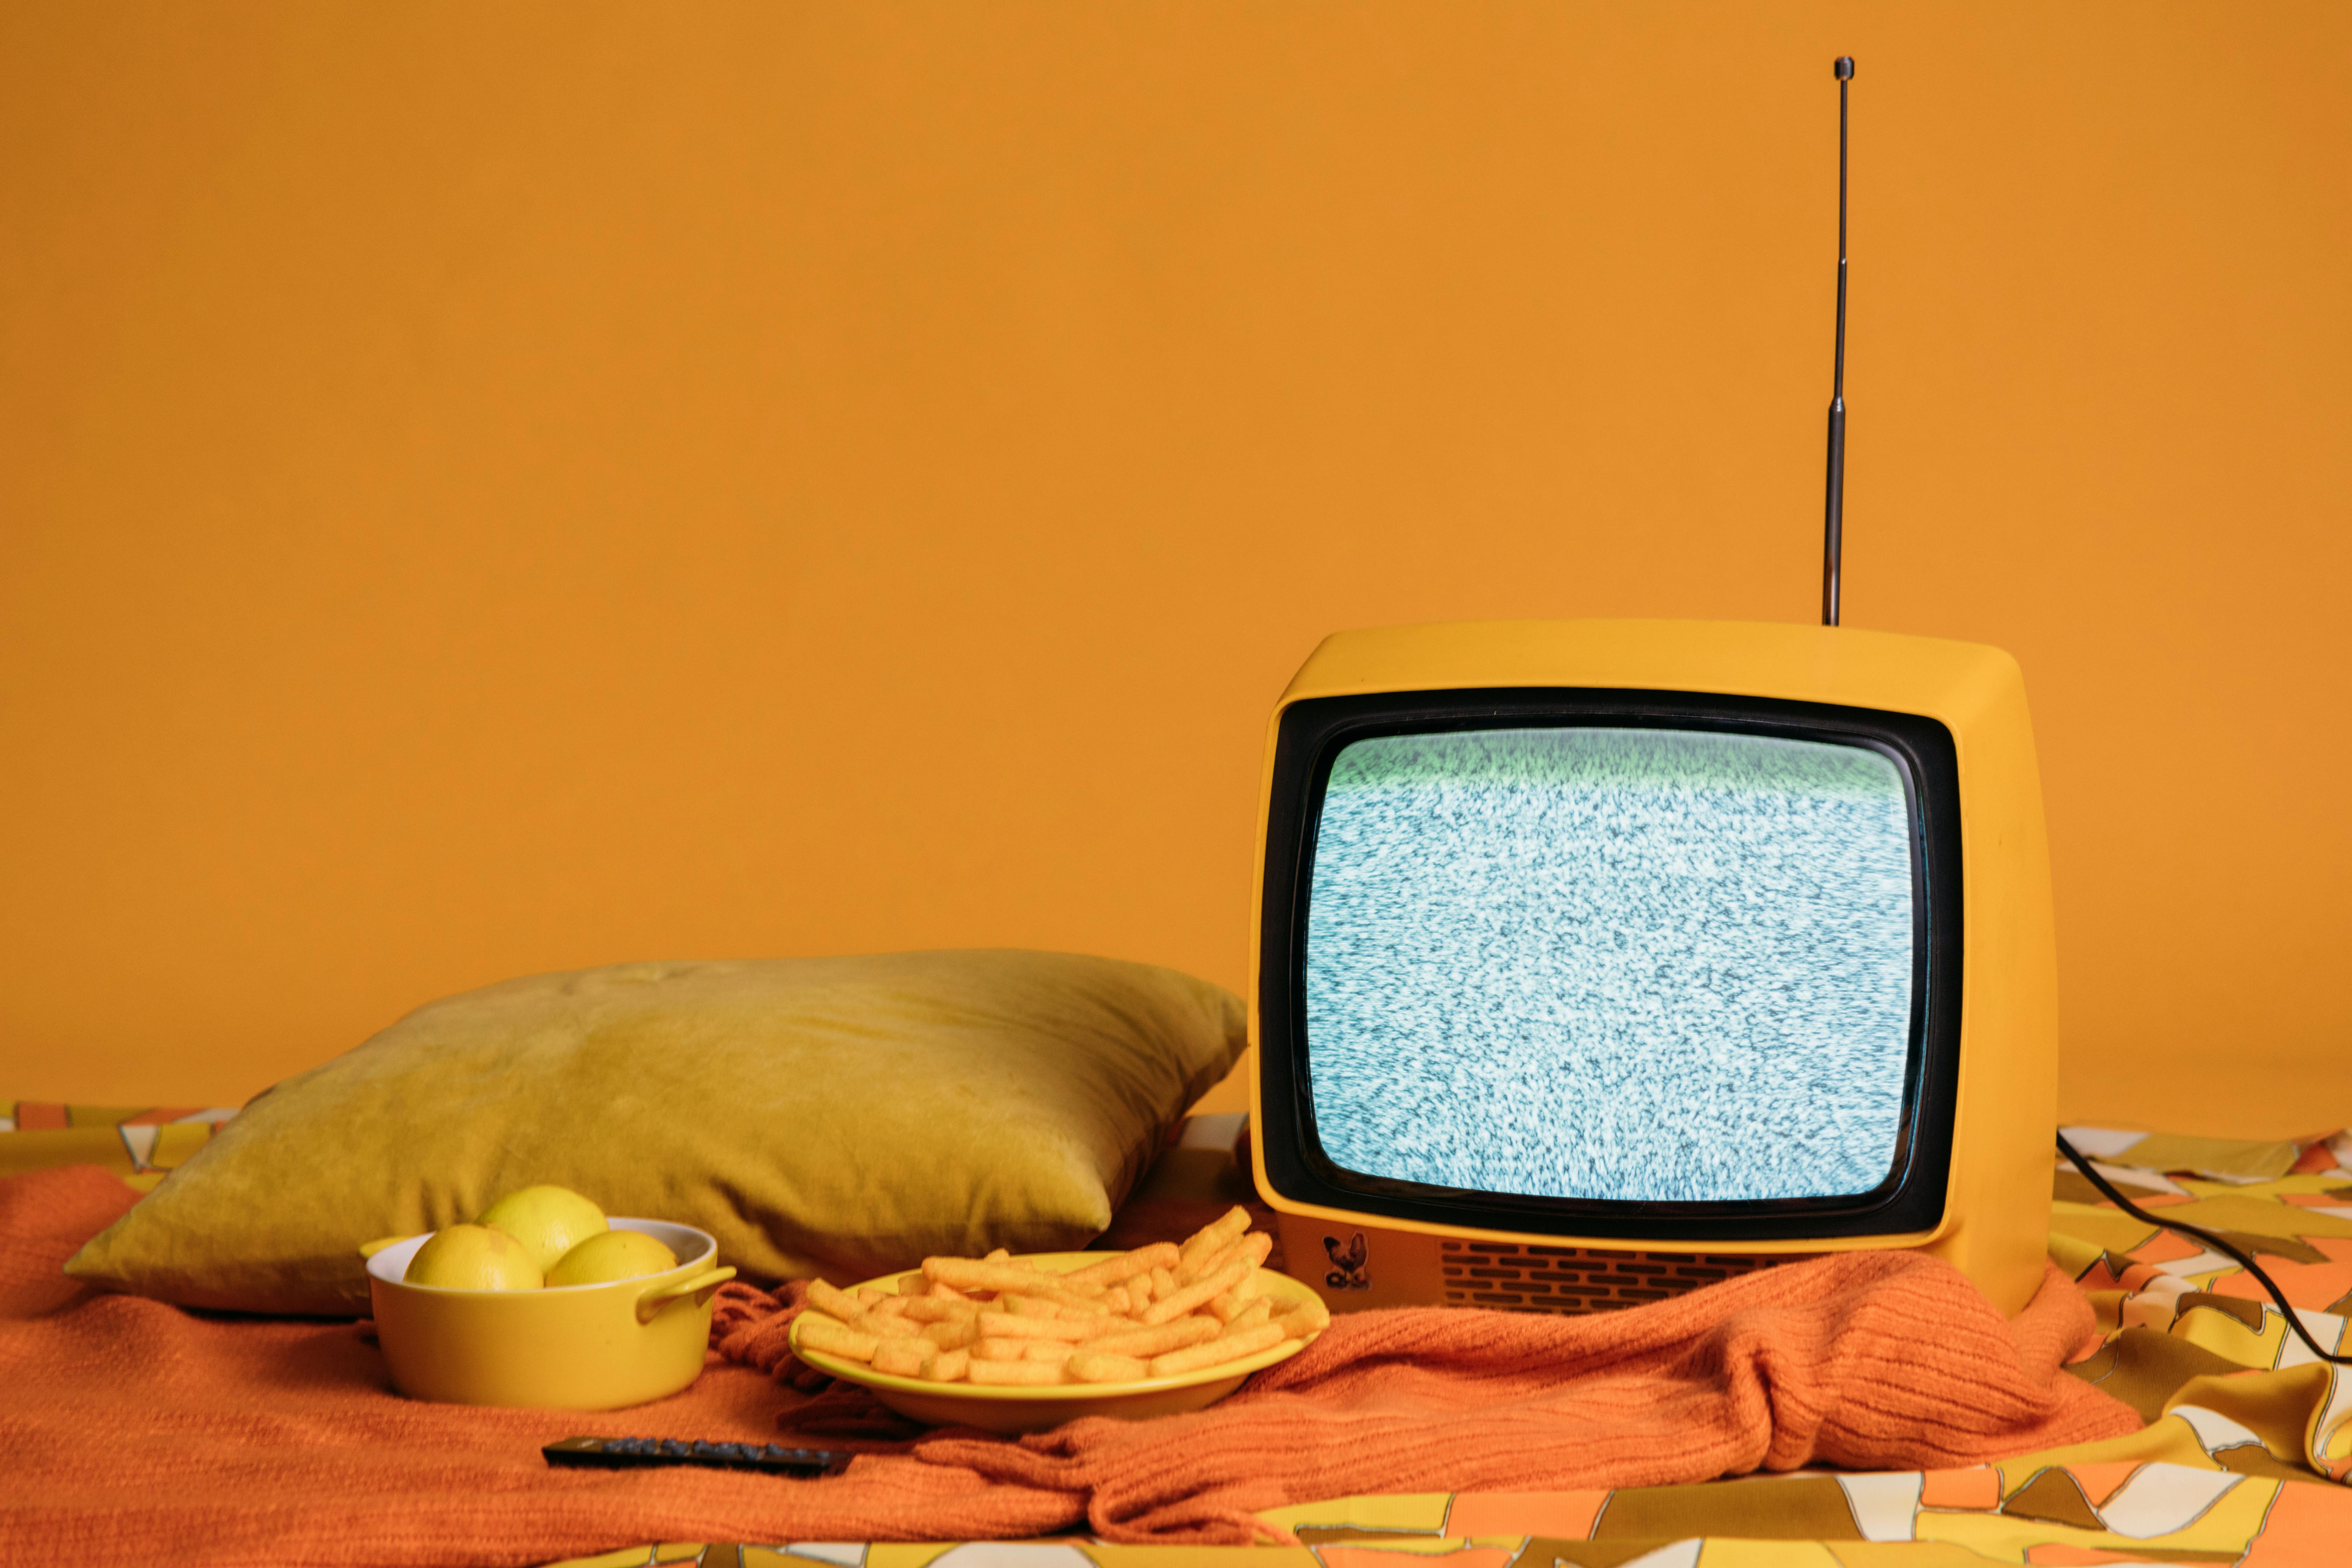 Is watching TV good for elderly?